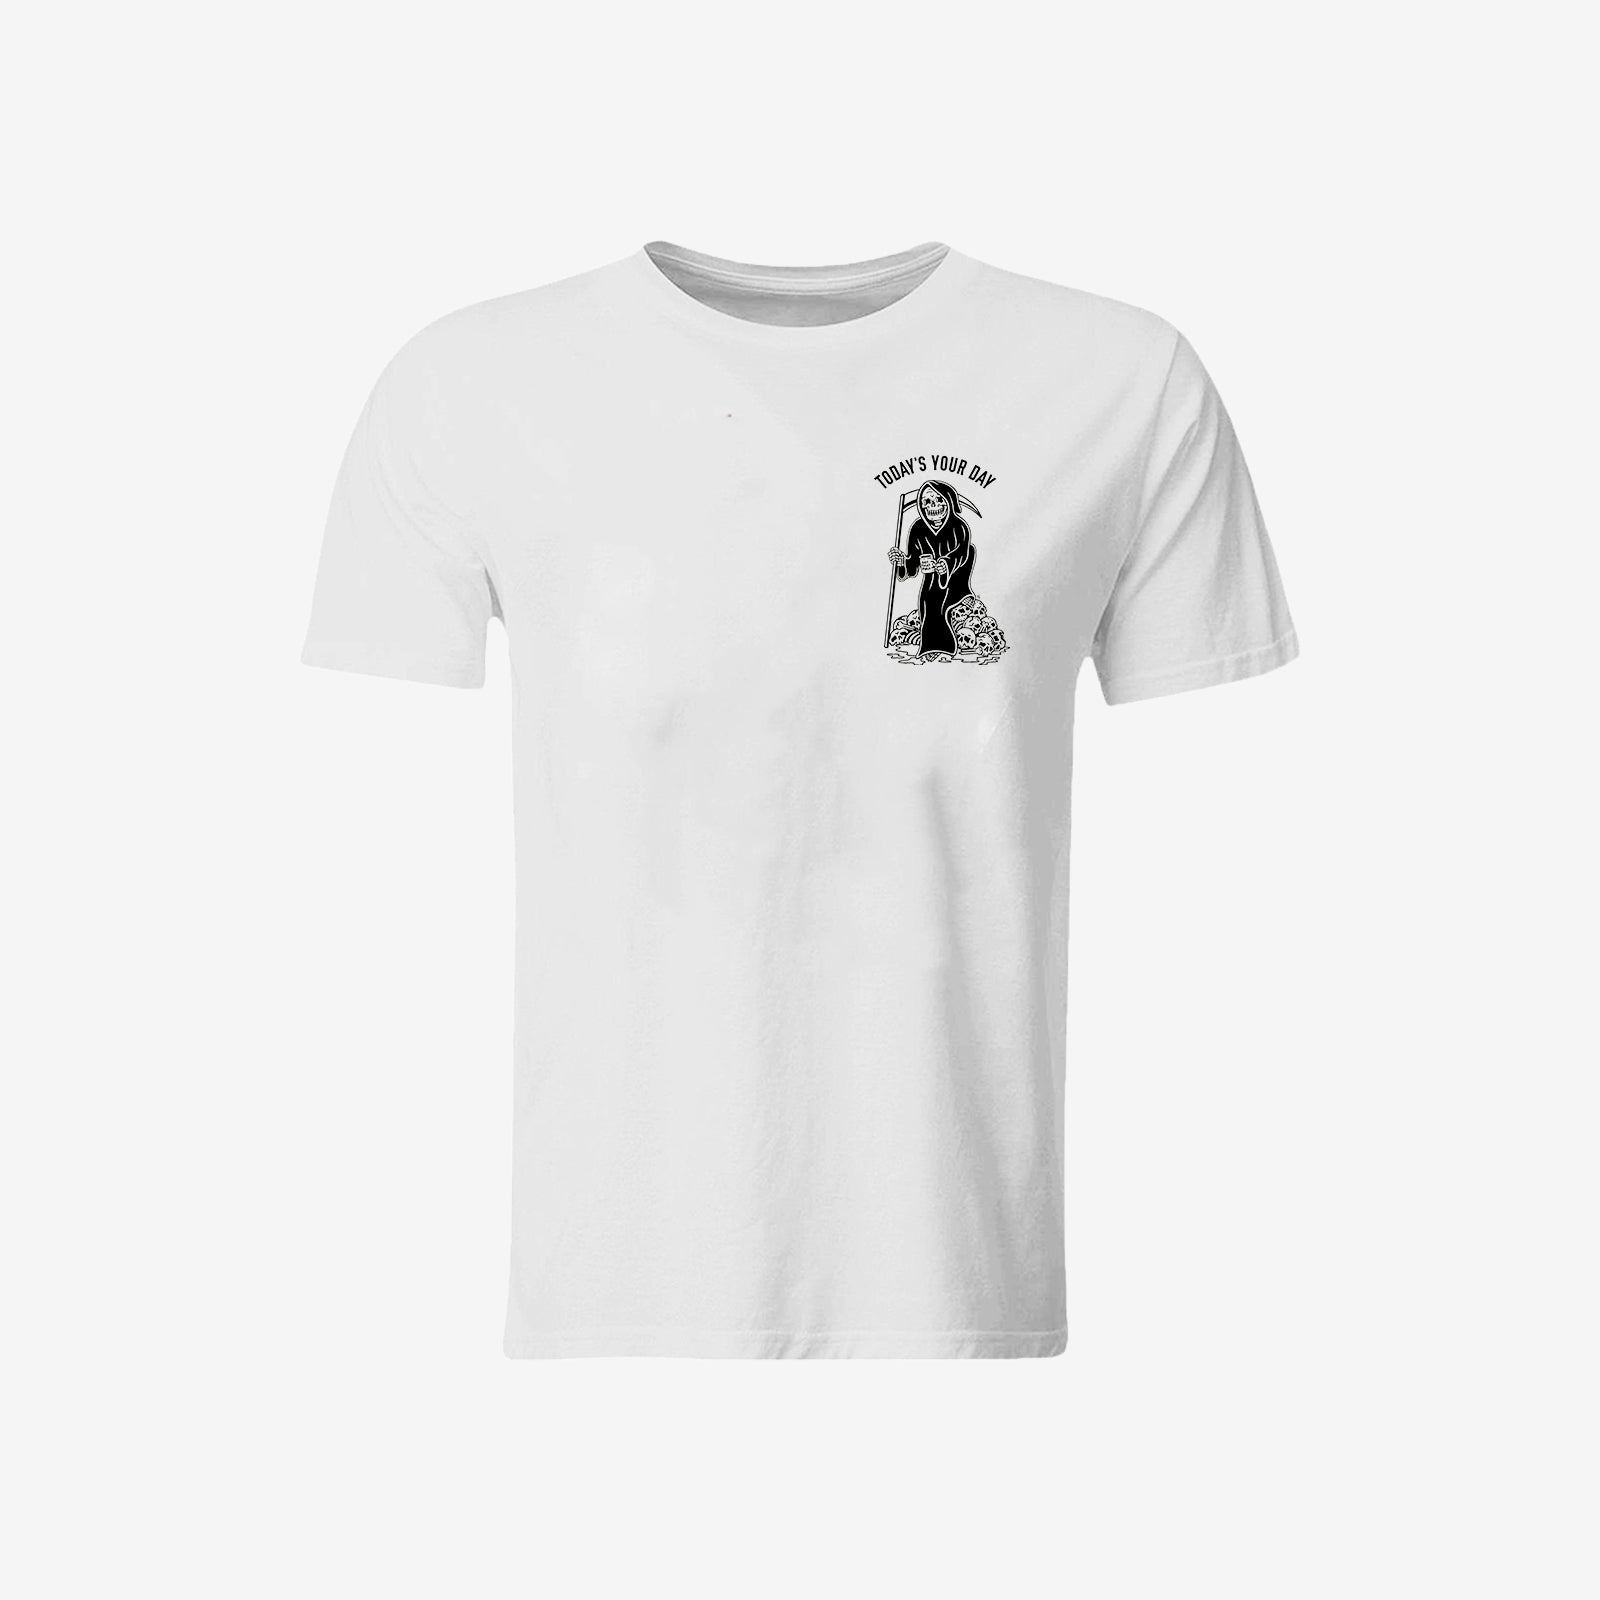 Cloeinc Today Your Day A Pile Of Skulls Printed White Reaper T-Shirt - chicyea